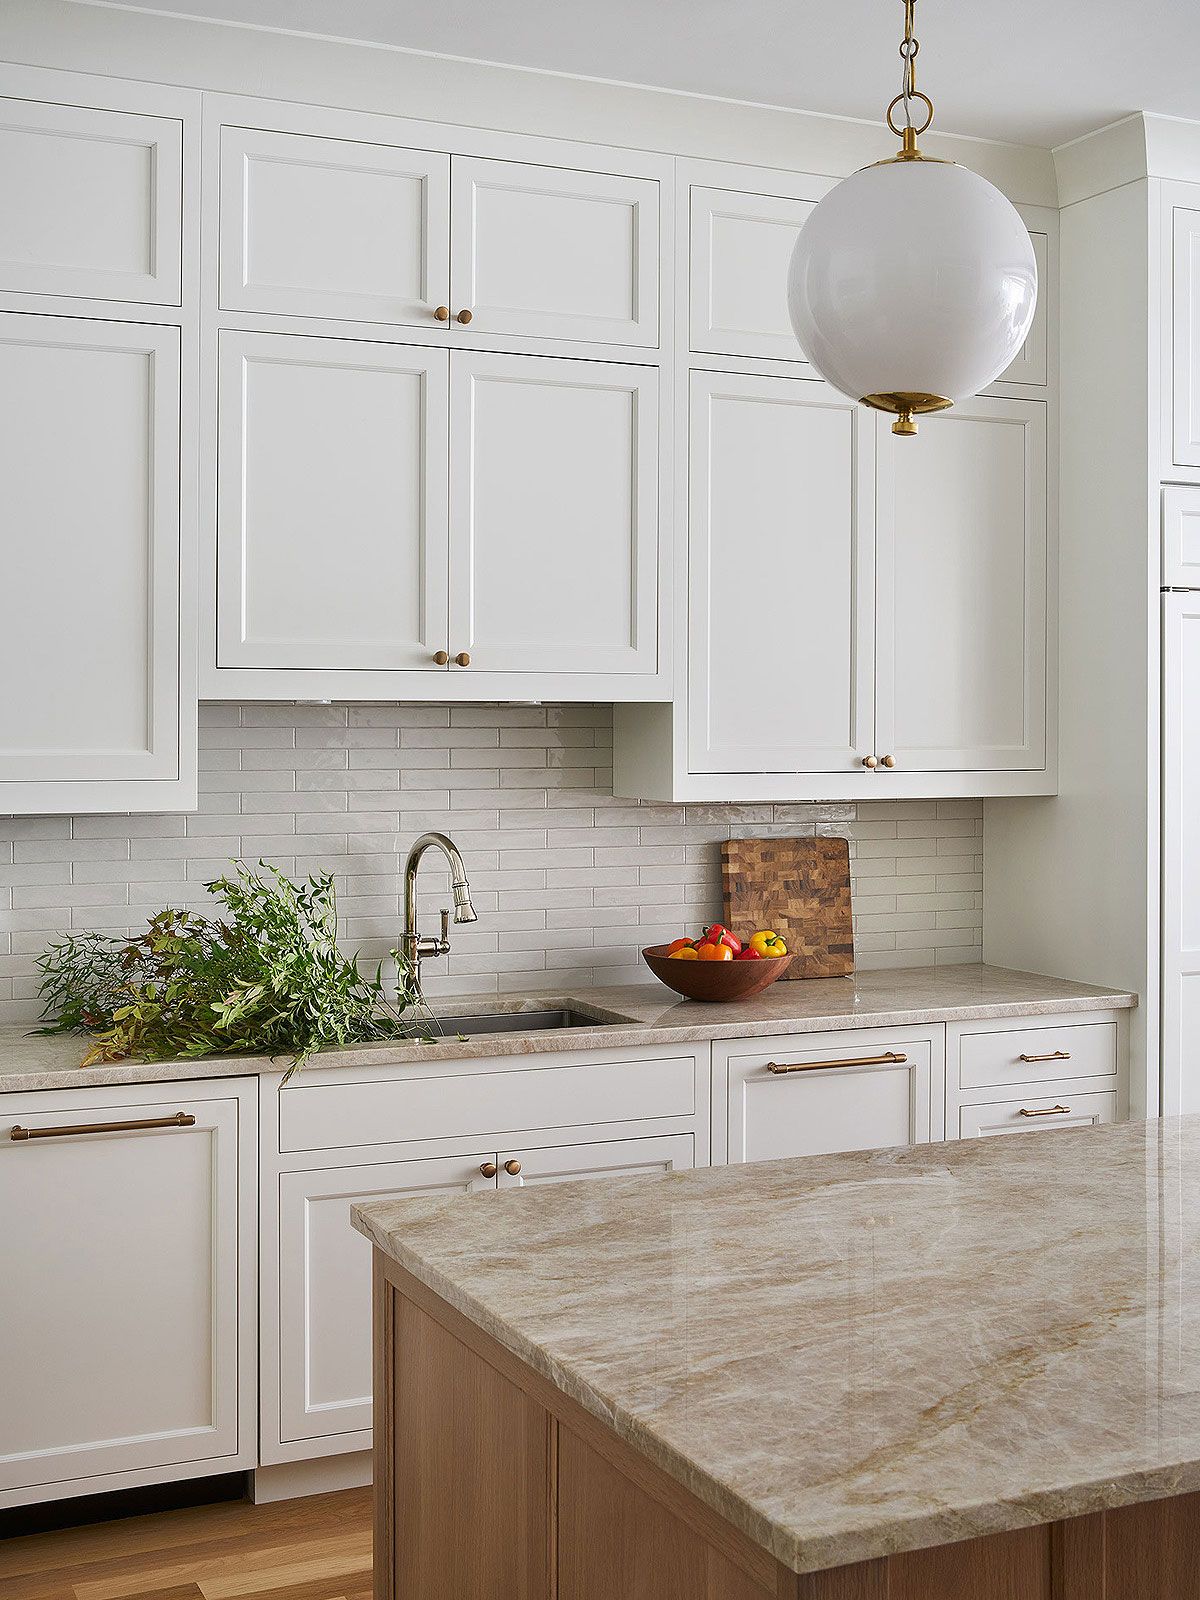 Elegant White Shaker Kitchen Cabinets: Timeless Style for Your Home